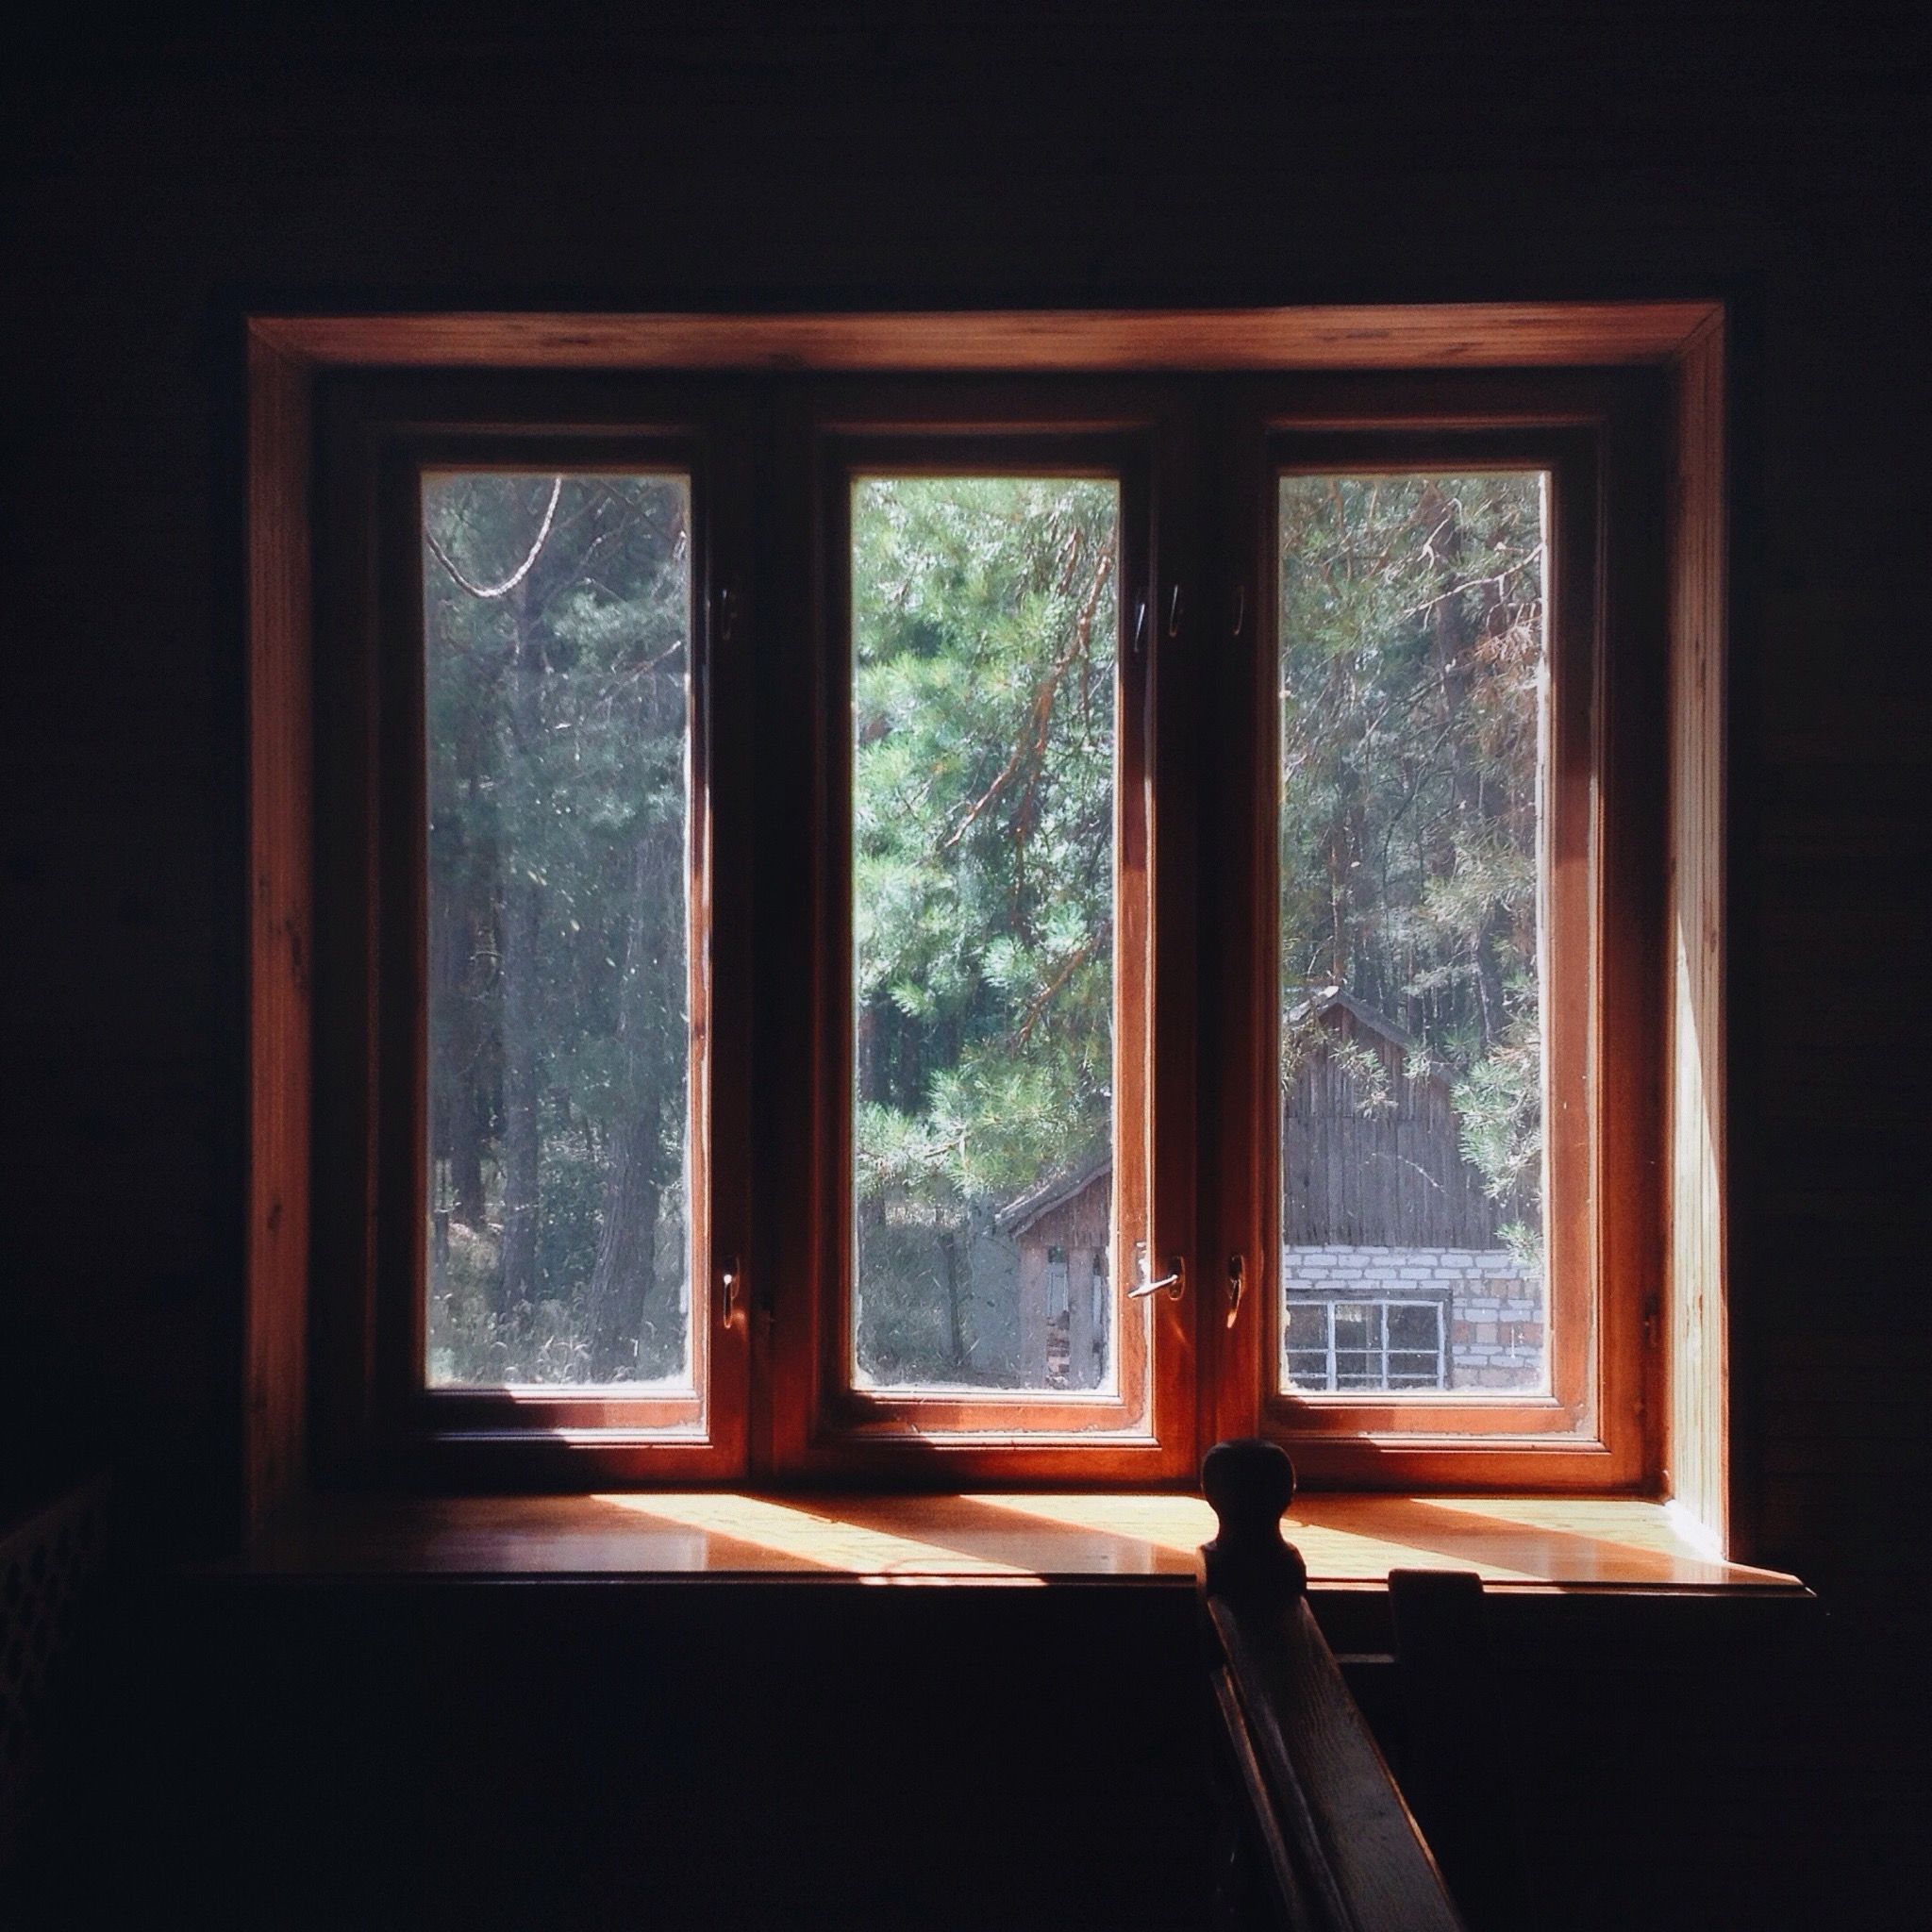 window, glass - material, indoors, transparent, window frame, house, home interior, glass, closed, dark, curtain, built structure, window sill, open, no people, architecture, close-up, wood - material, day, sunlight